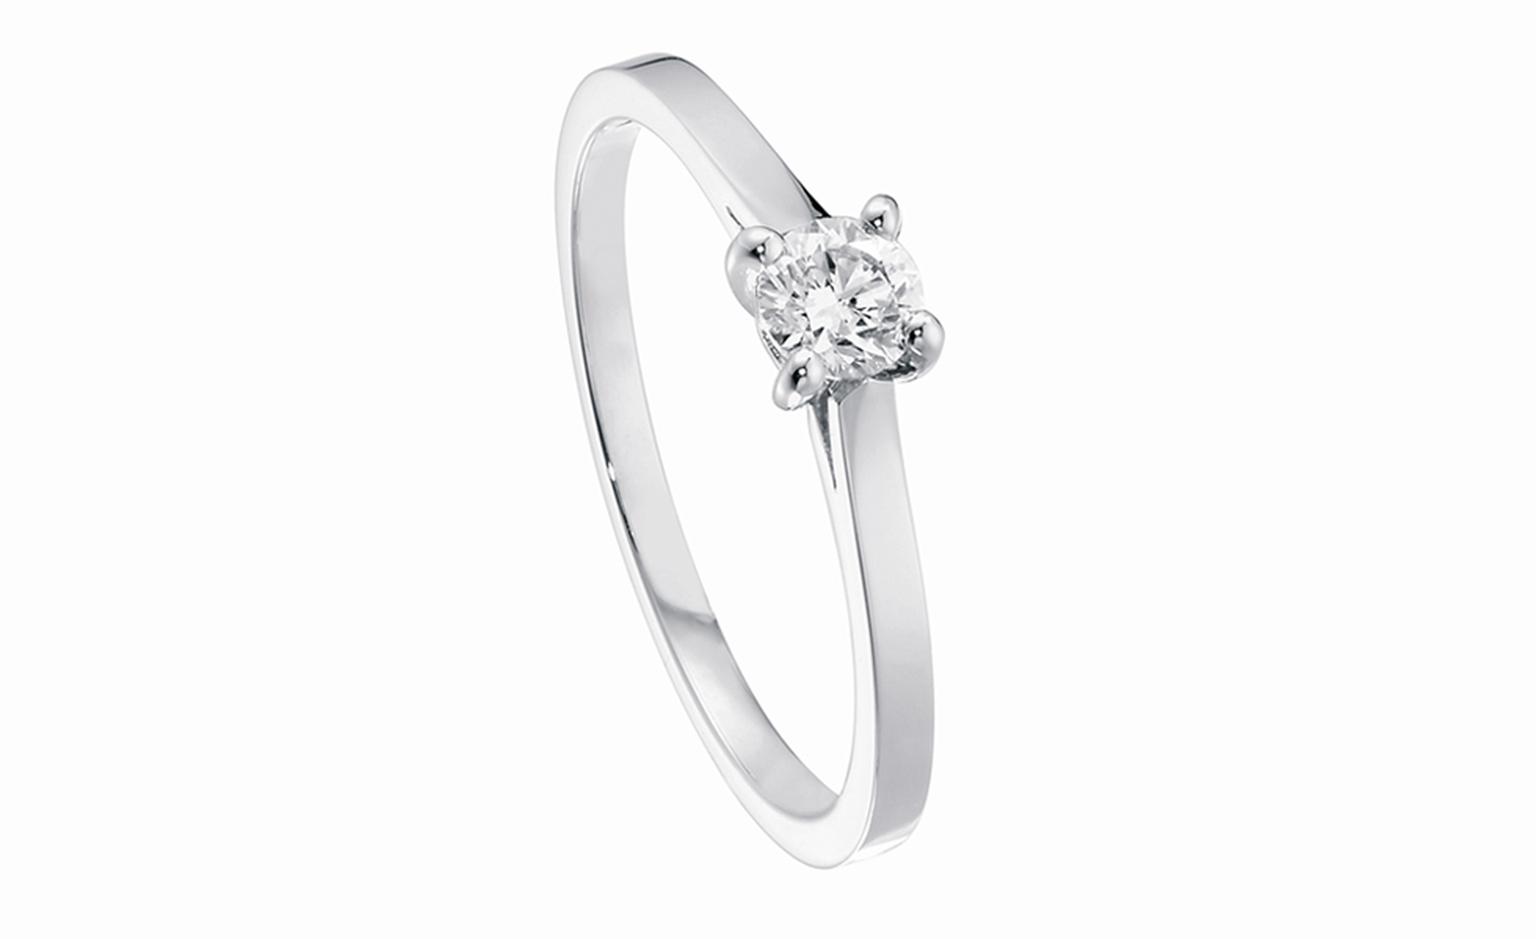 Piaget solitaire engagement ring from £3,060